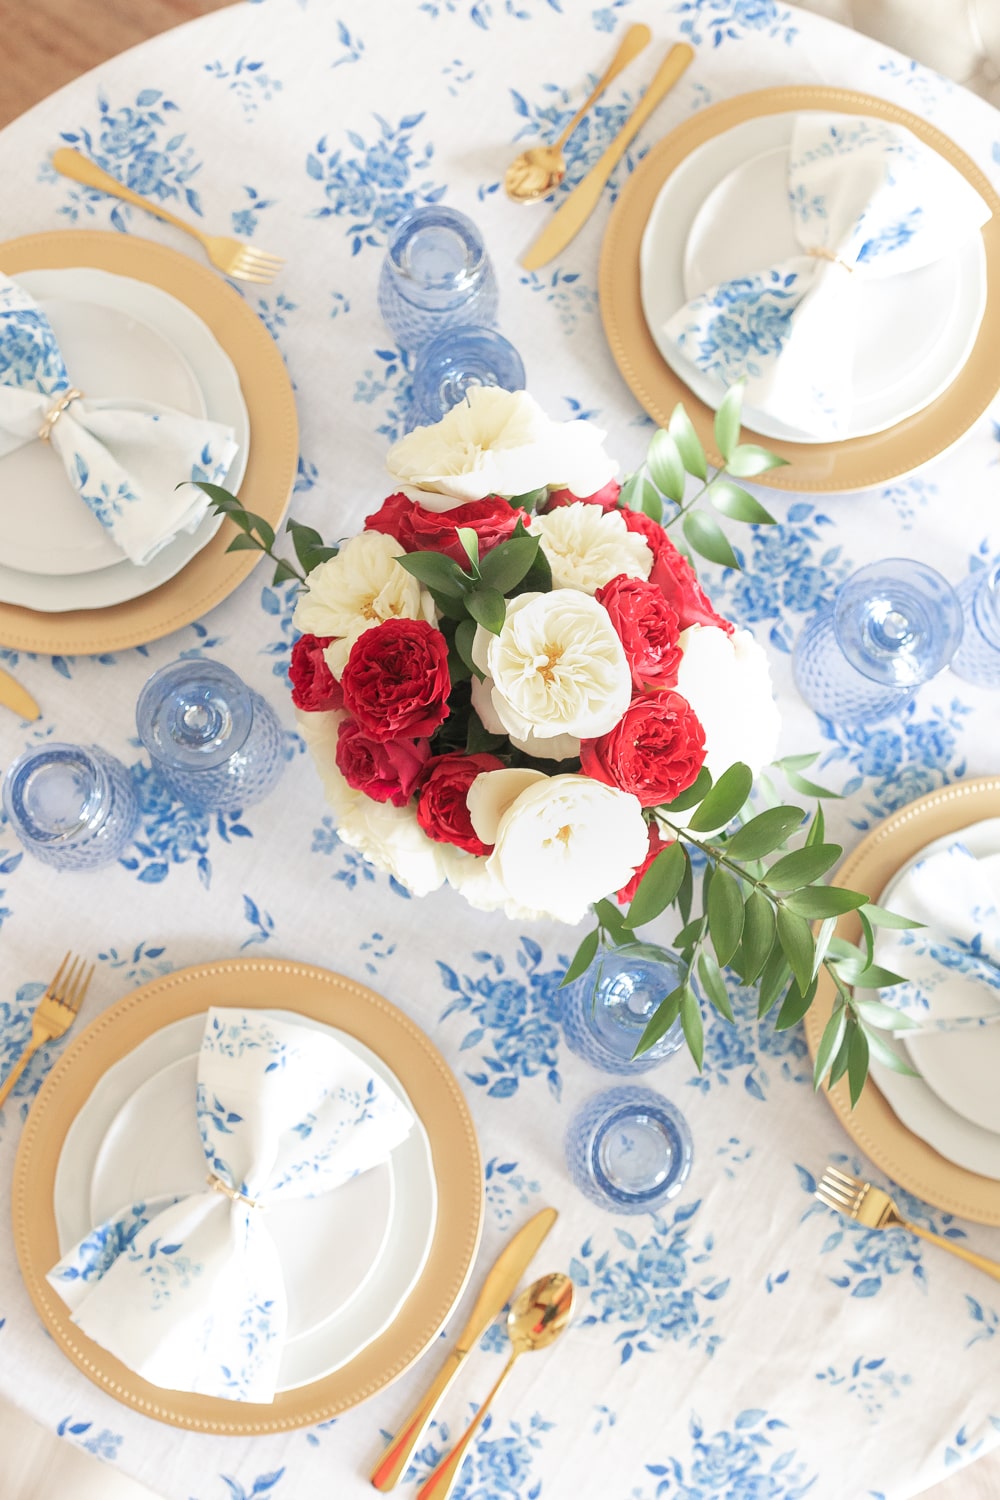 4th of july table decorations created by blogger Stephanie Ziajka on Diary of a Debutante